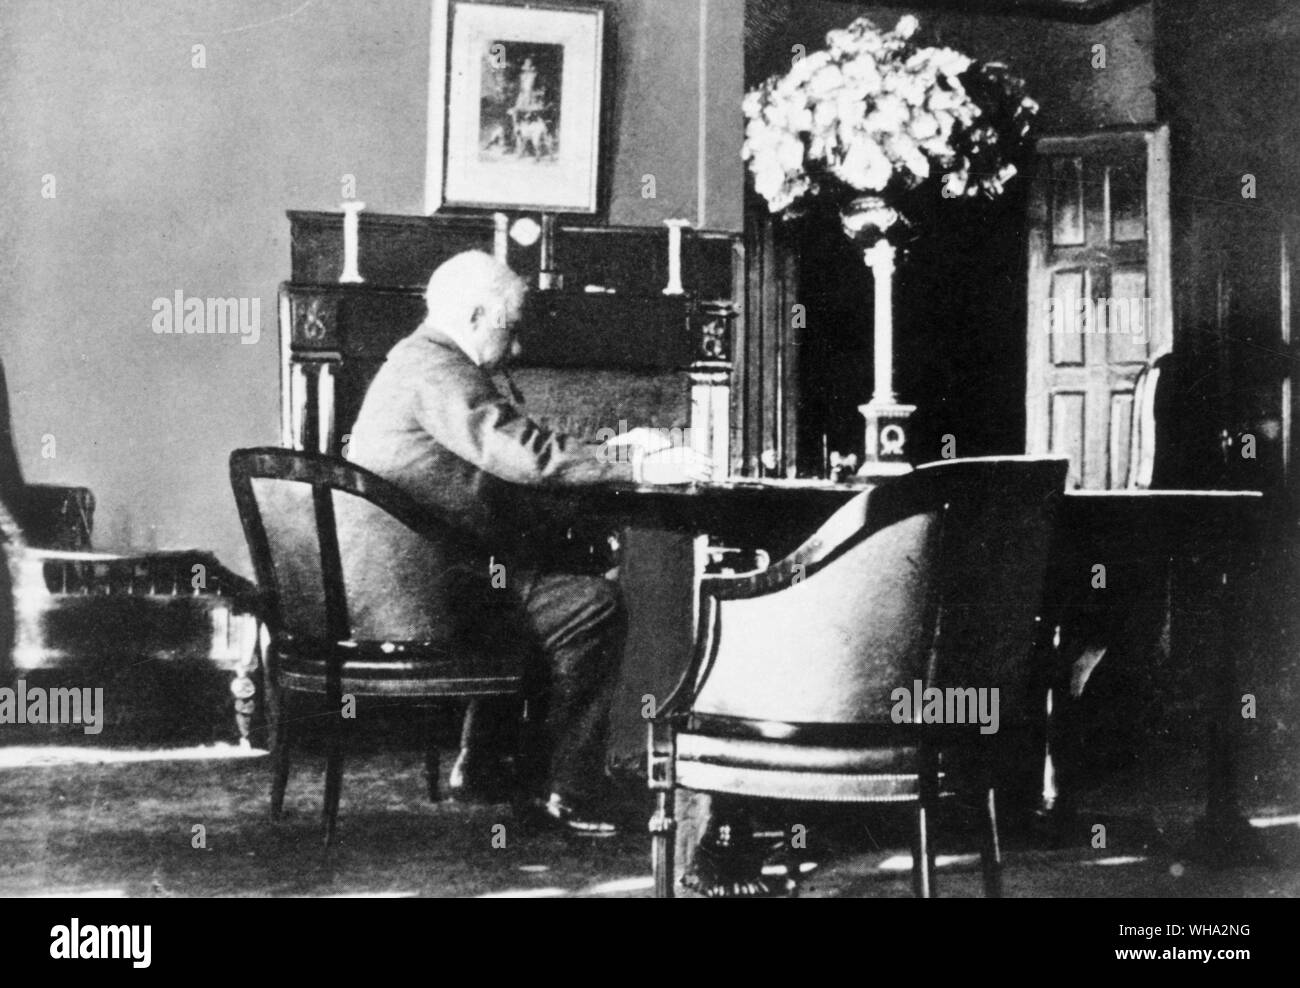 Morgan, John Pierpont Sr. (J. P. Morgan) US businessman, financier, and steel industrialist; co-founded U.S. Steel Corp. 1901 (1837-1913) playing cards Solitaire . . . Stock Photo